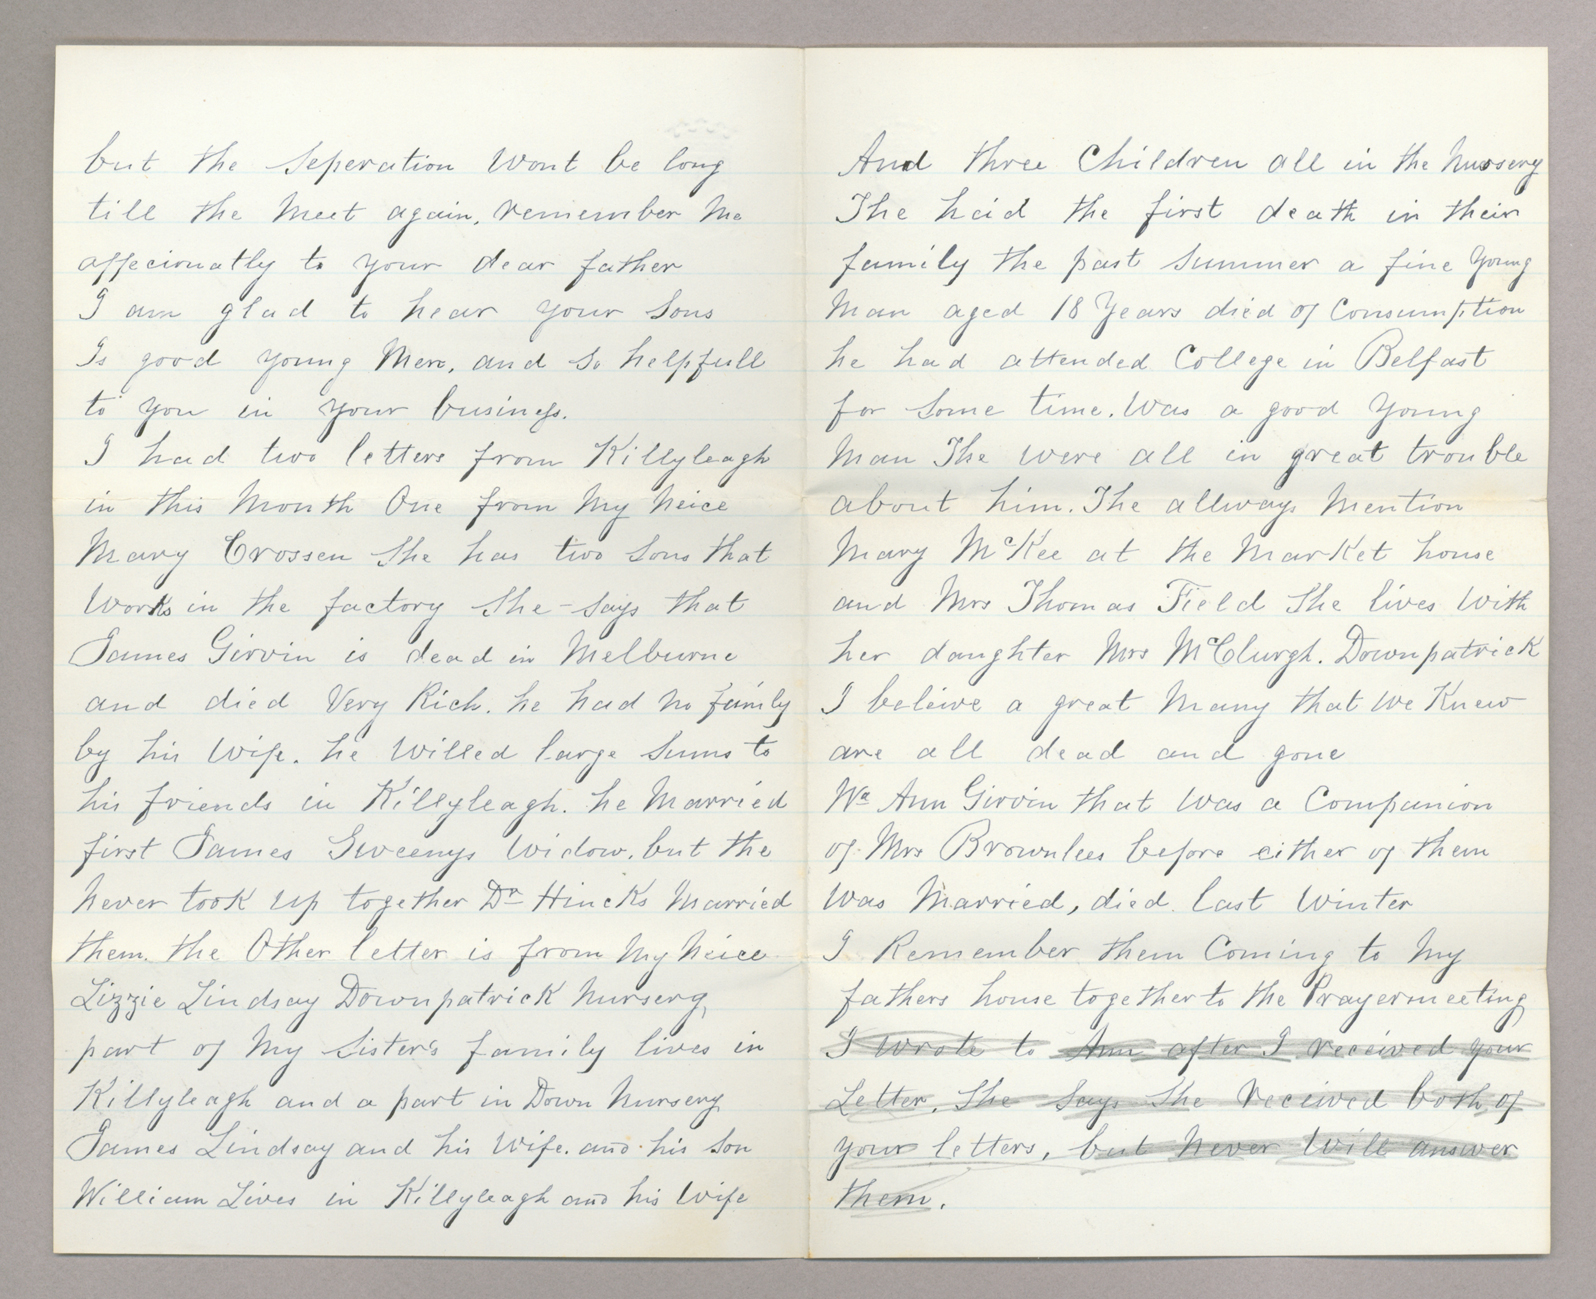 Letter. James Stott, New York, New York, to Mr. John [E.] Brownlee, North Wharton, Pennsylvania, Pages 2-3